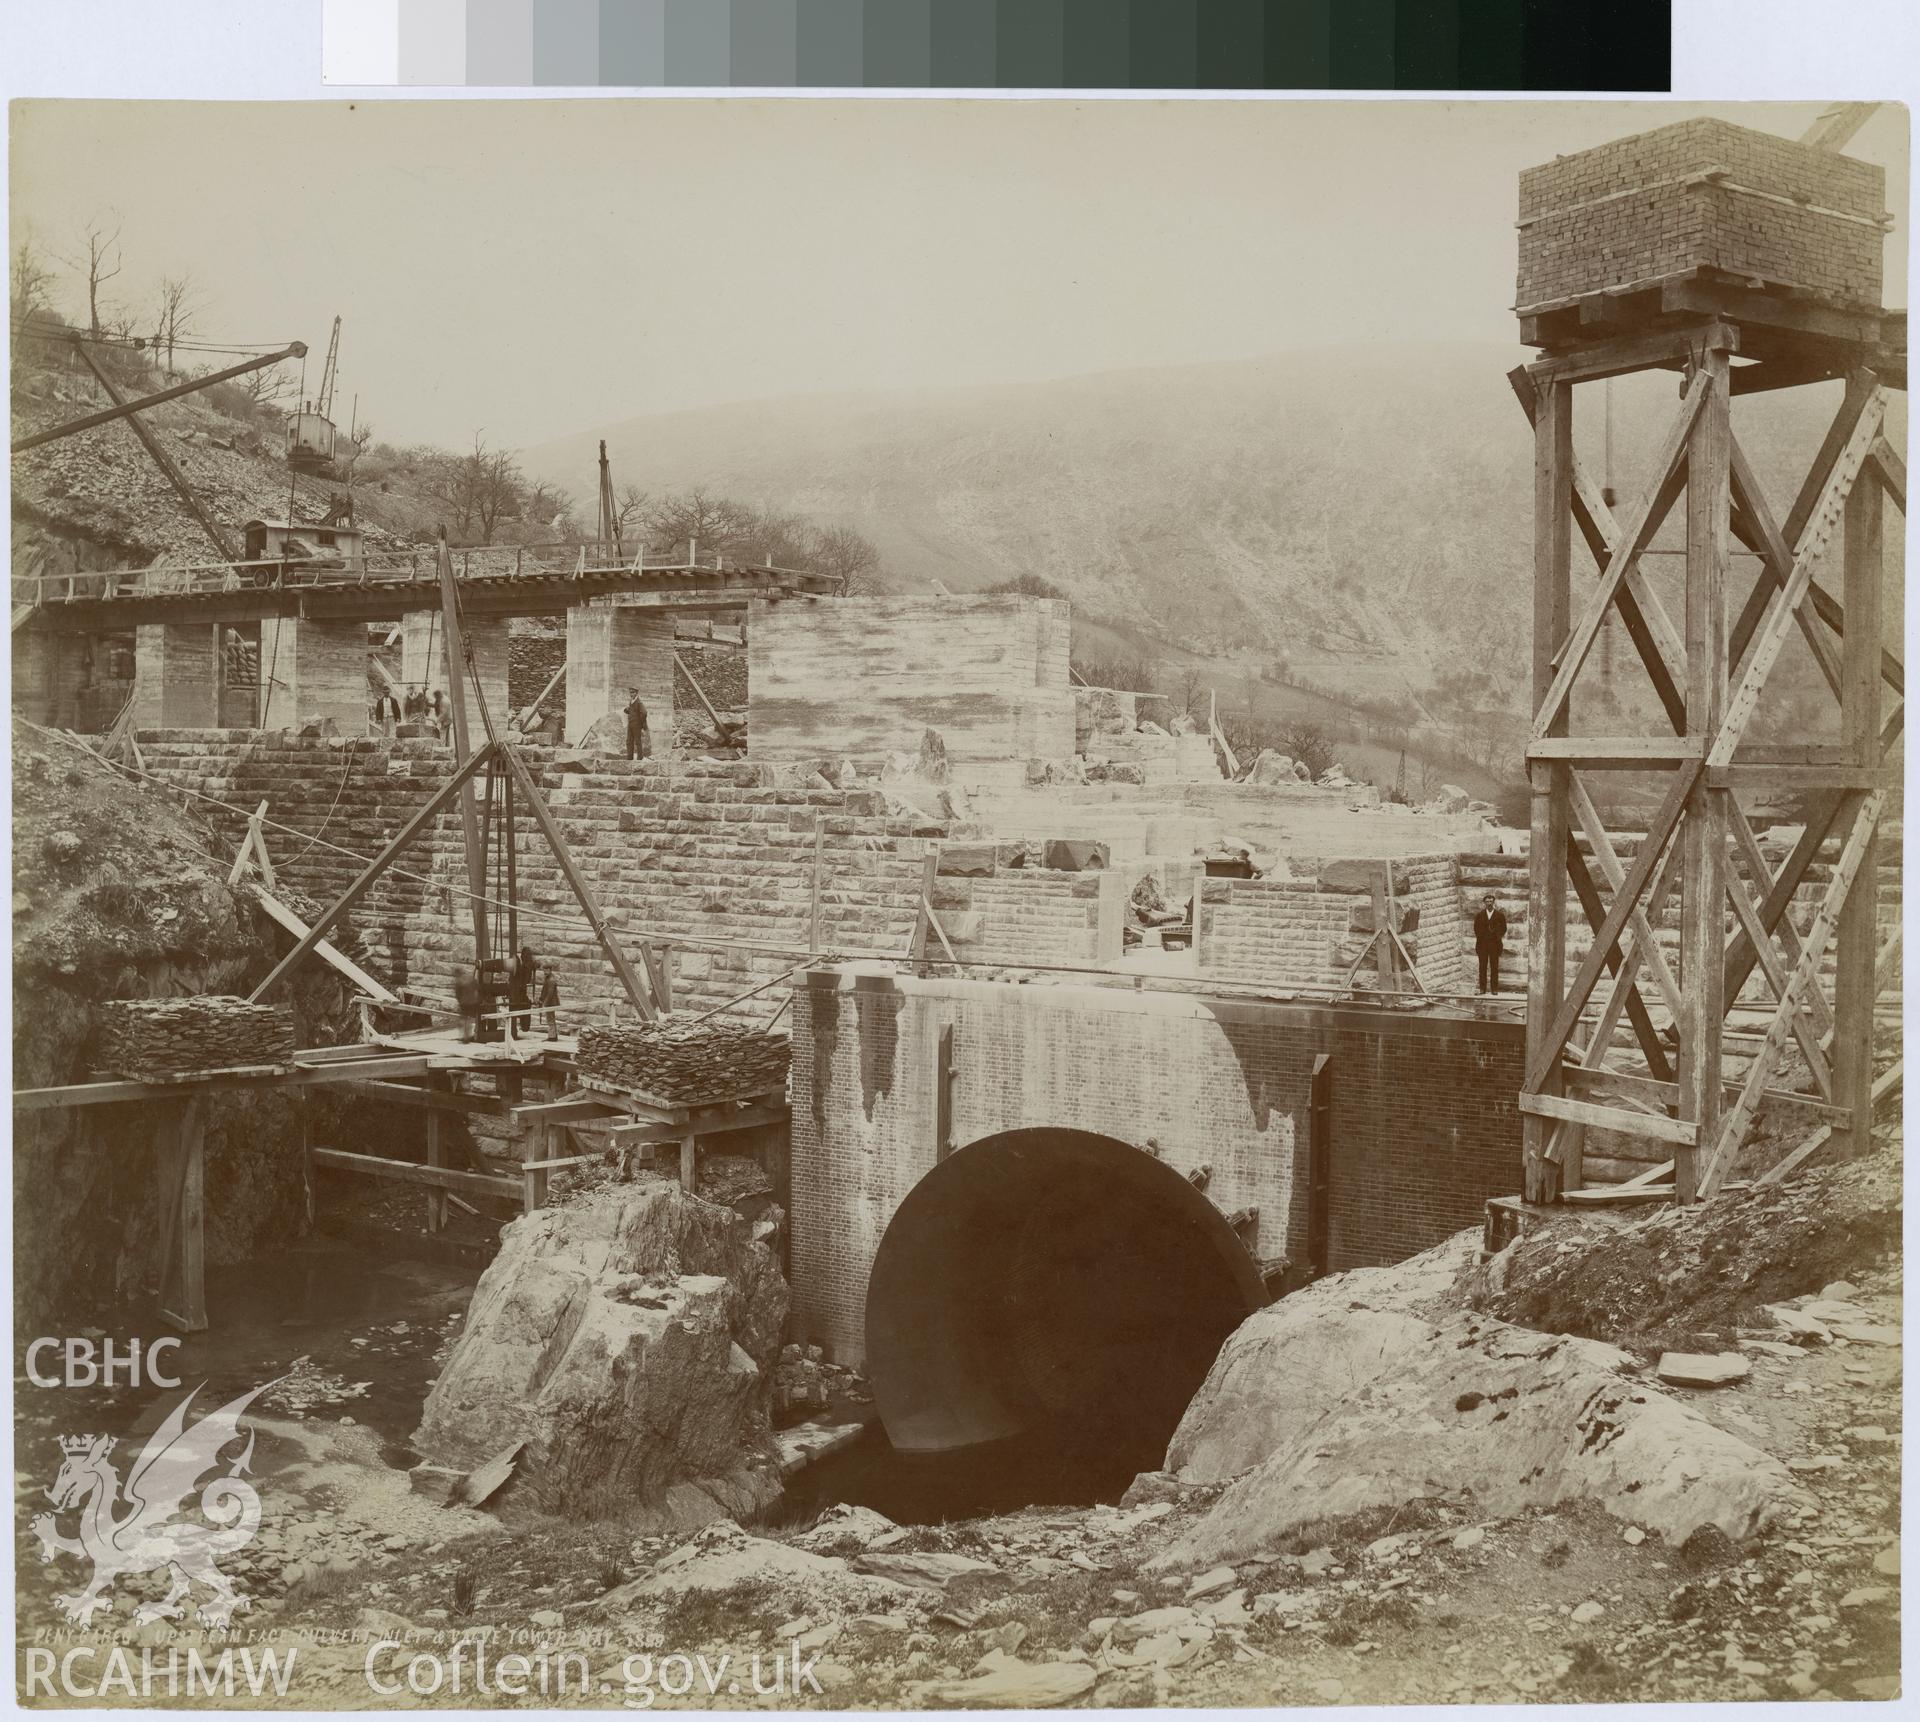 Digital copy of an albumen print from Edward Hubbard Collection showing the Pen y Garreg upstream face culvert inlet and valve tower, taken May 1899.